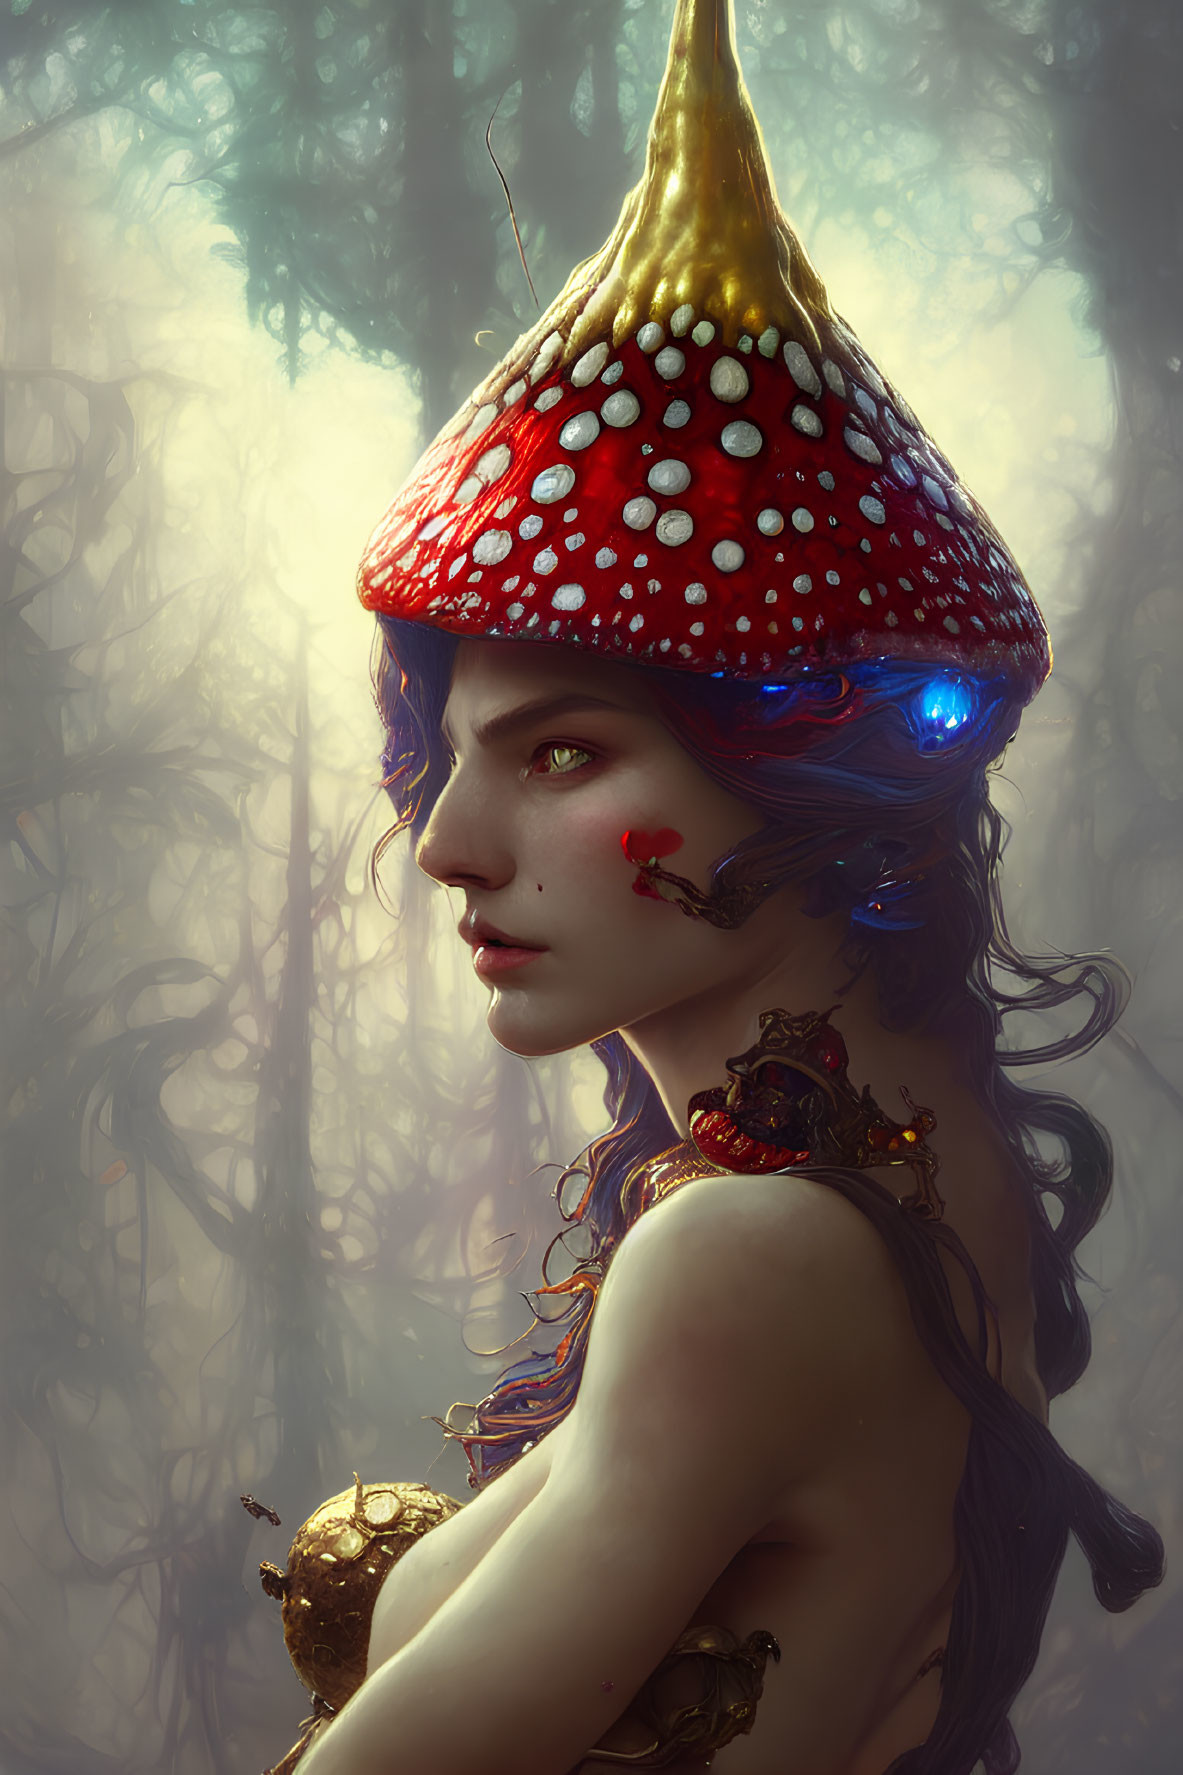 Blue-skinned female figure in golden armor with mushroom headpiece in mystical forest